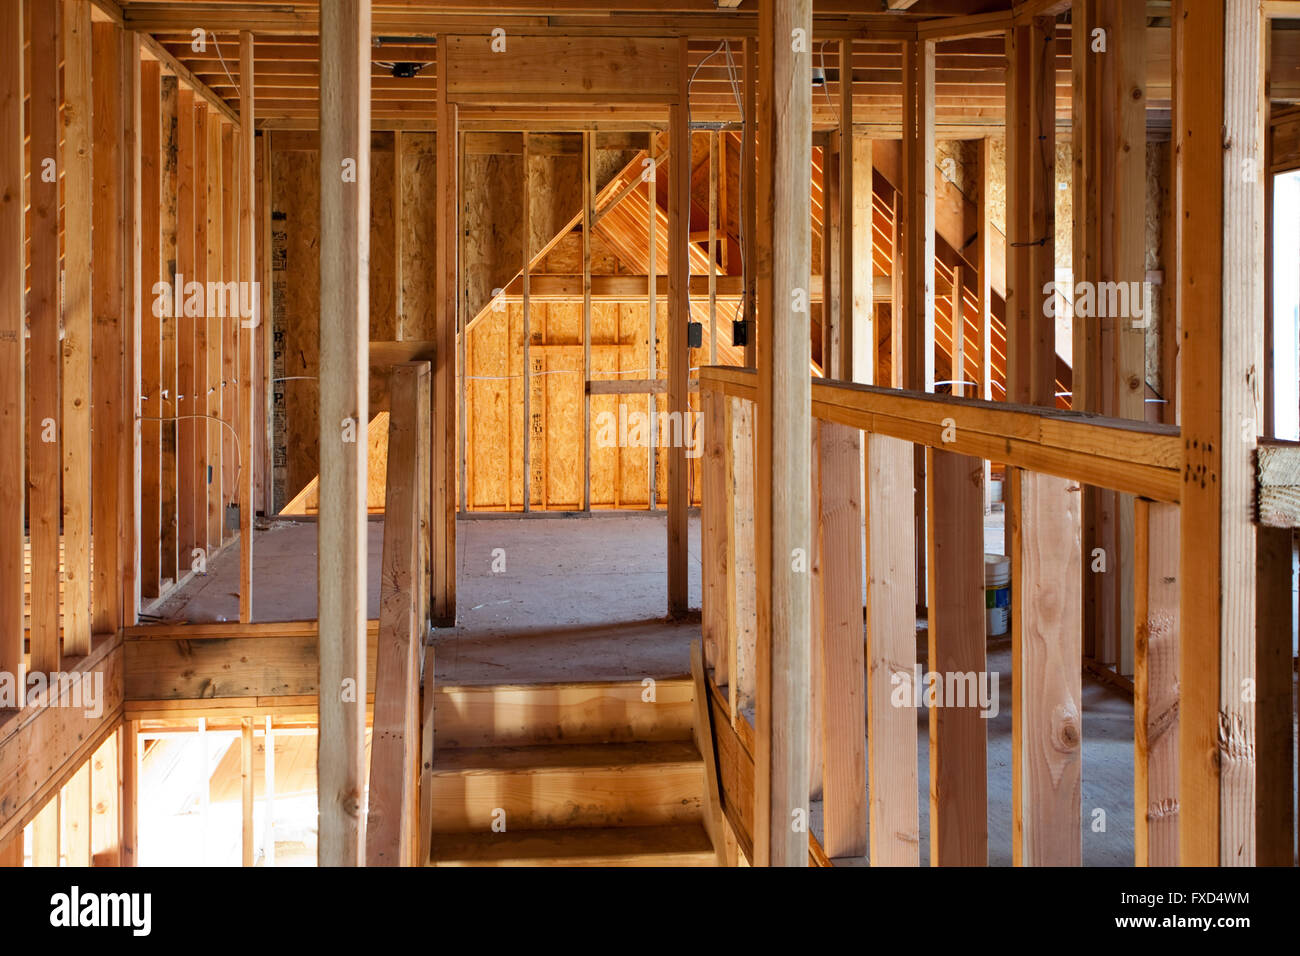 Unfinished Home Framing Interior Stock Photo